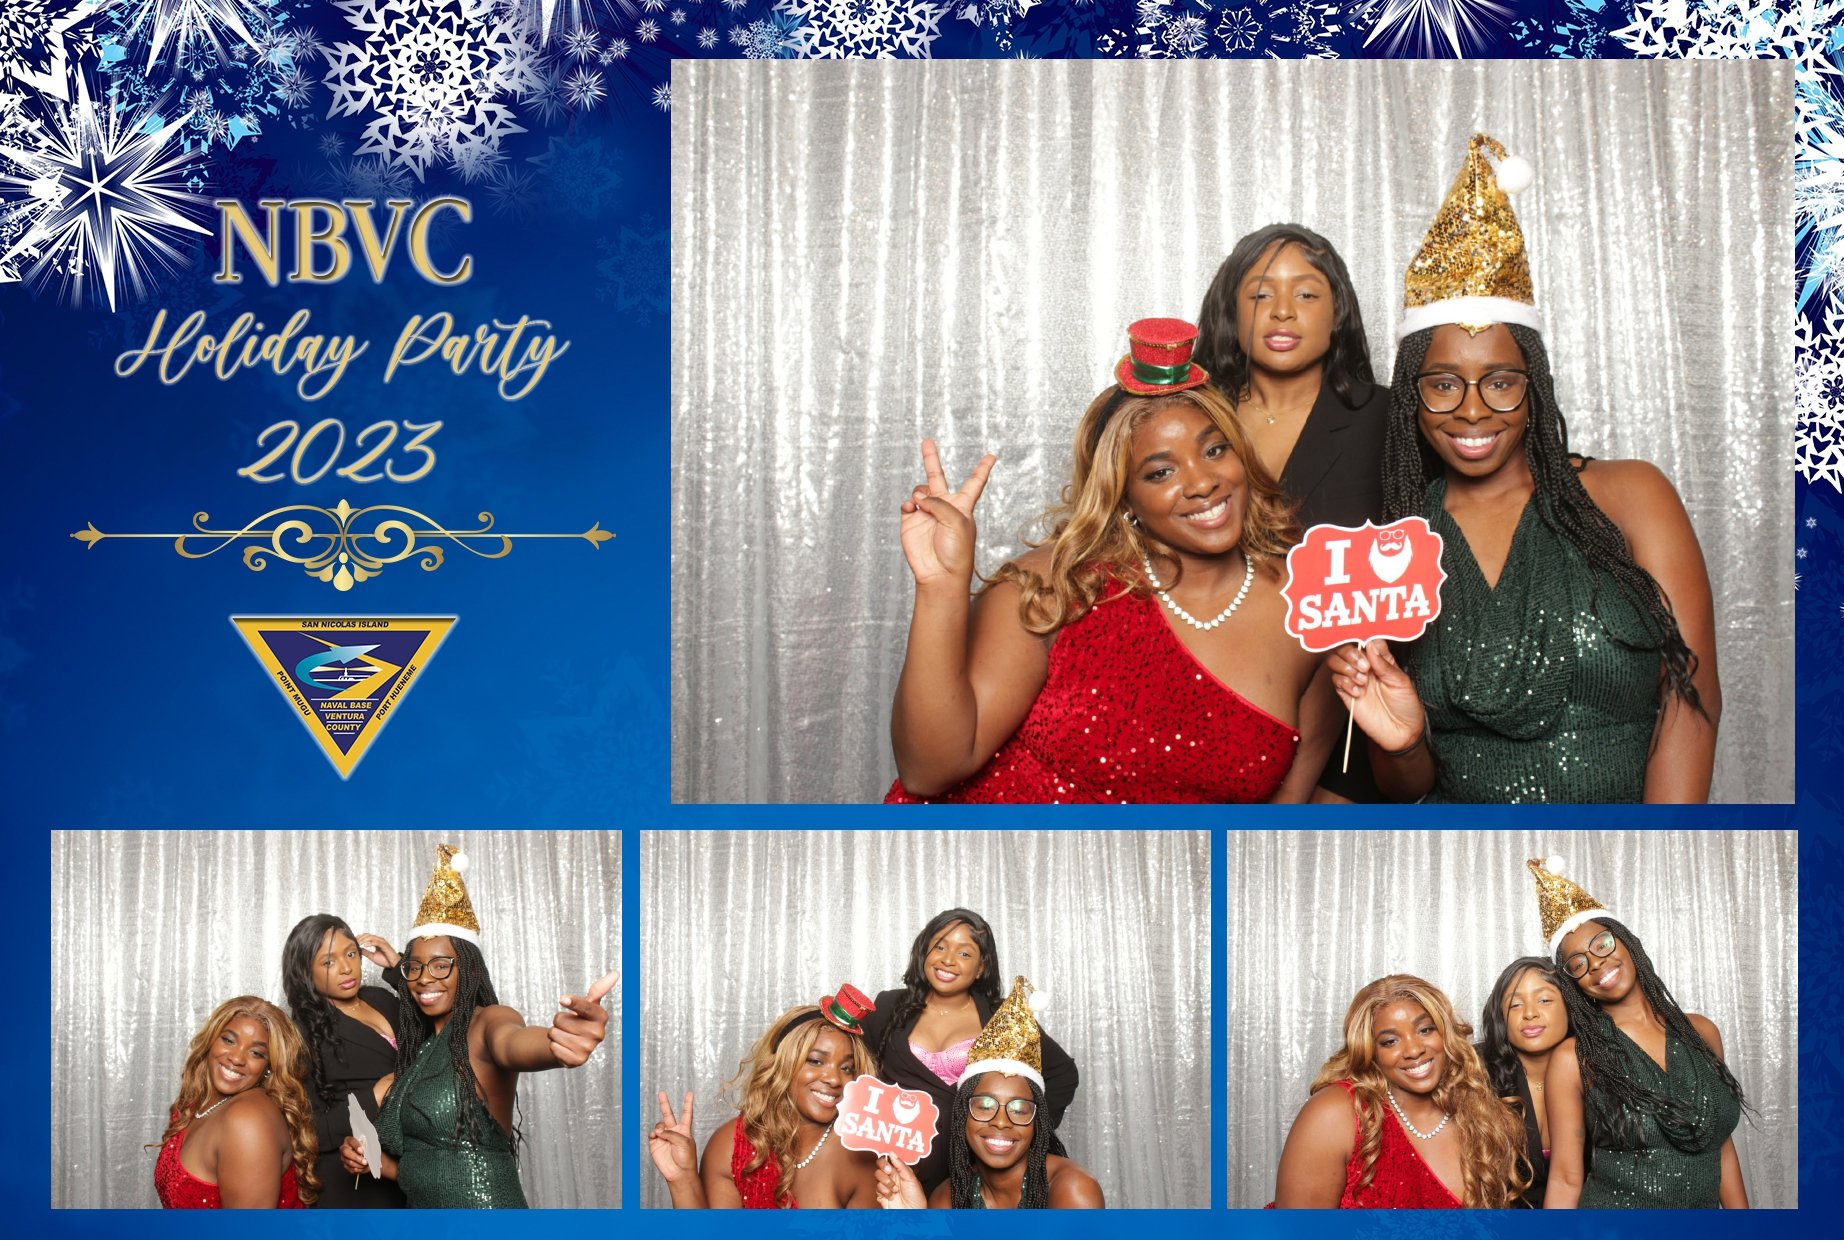 NBVC Holiday Party 2023